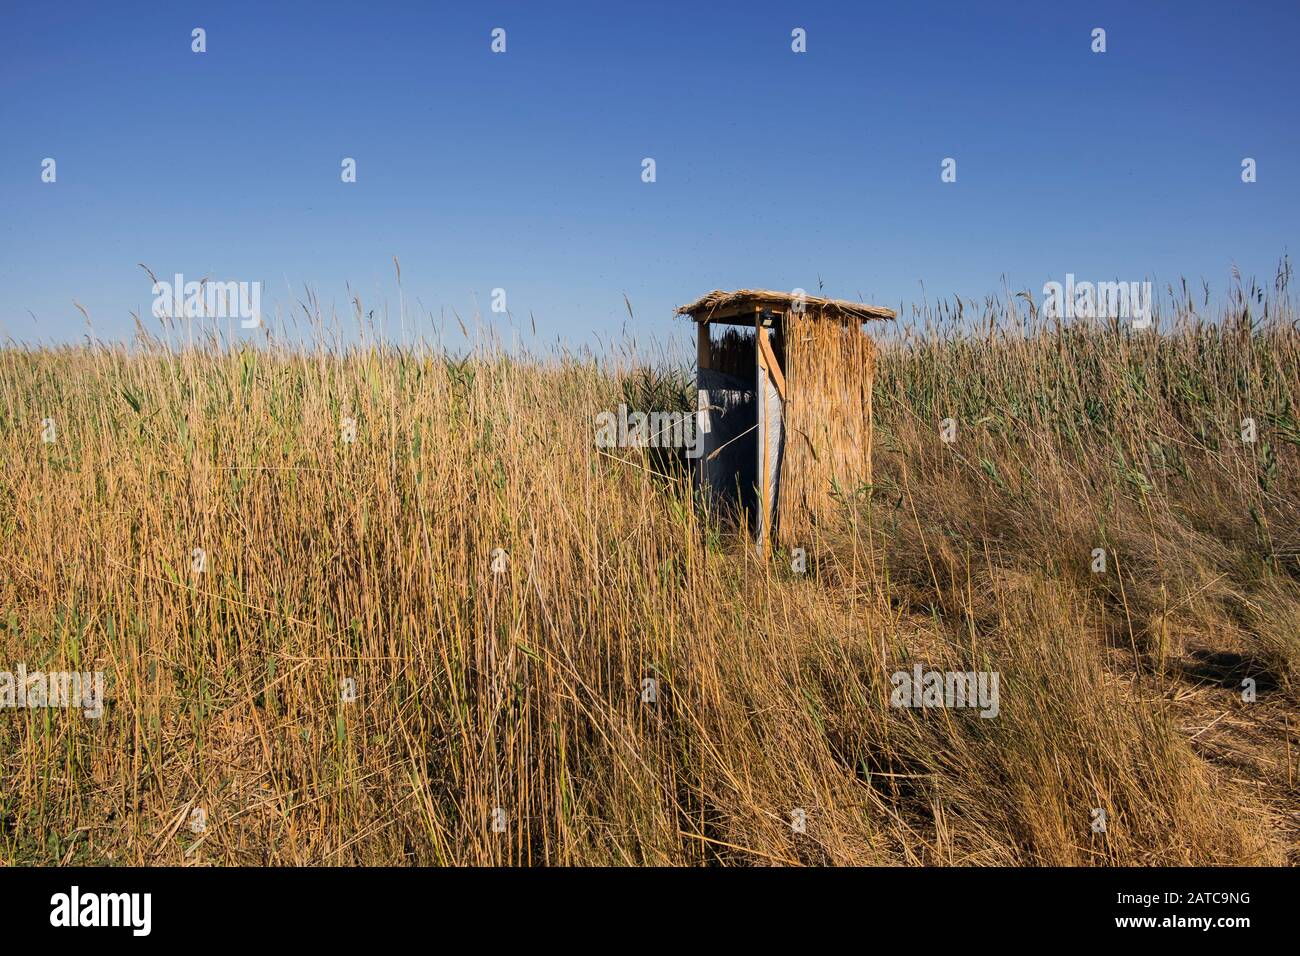 Toilet from the straw in the steppe Stock Photo